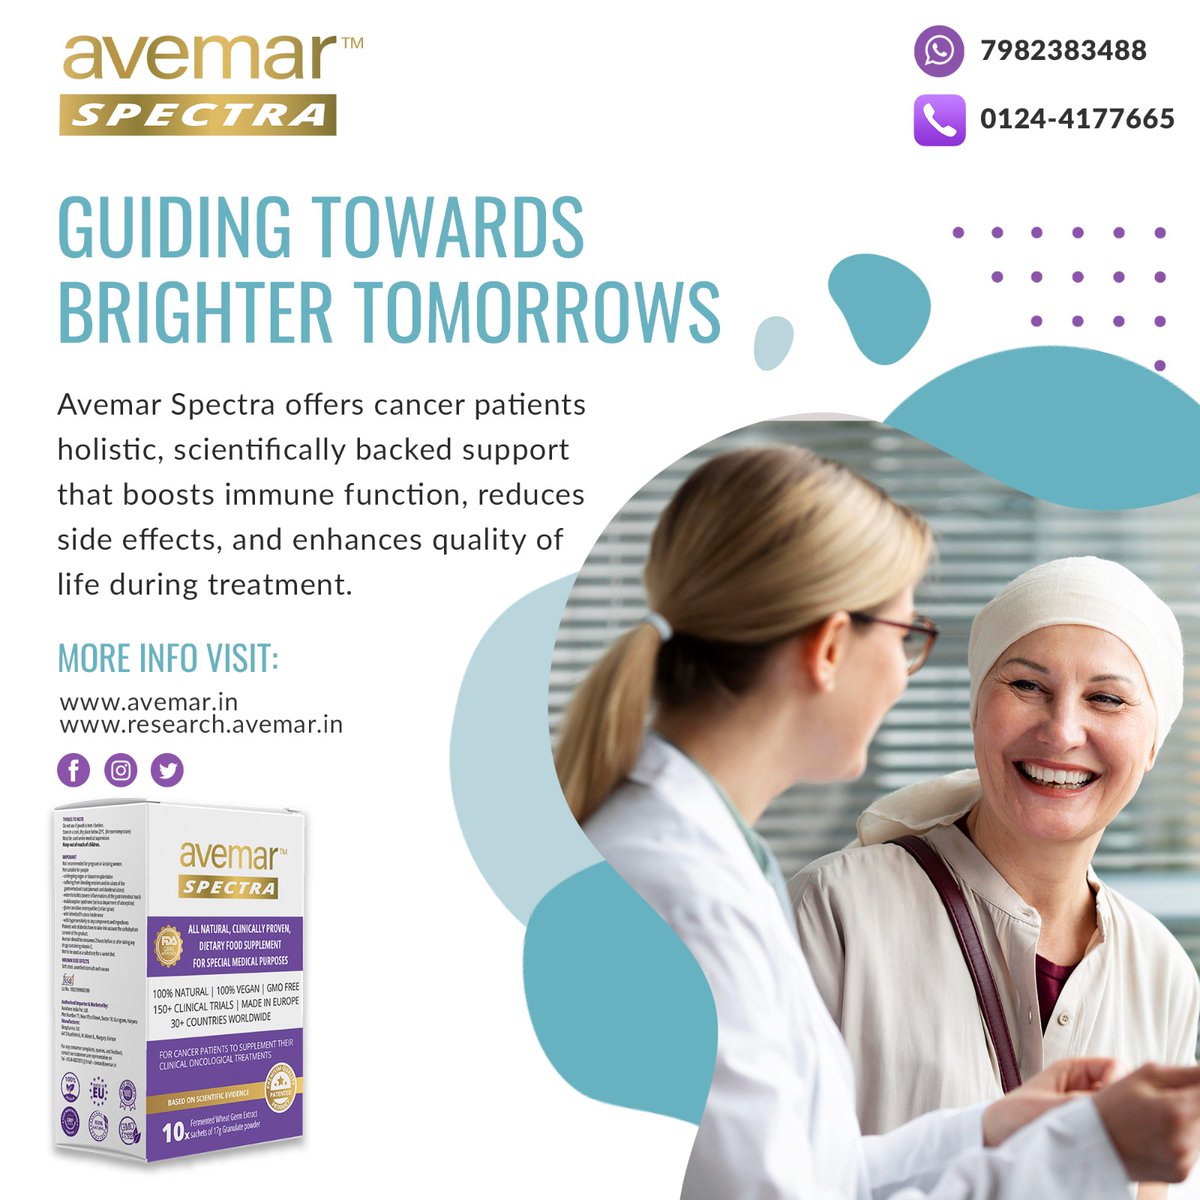 A supplement that speaks volumes in the journey to wellness. Avemar Spectra, my trusted companion. 🌈 #avemarspectra
#HealthyLiving'
#CancerSupport
#FightCancer
#hopefortomorrow
#supportivesupplements
#oncology
#breastcanser
#lungcancer
#pancreaticcancer
#everyone